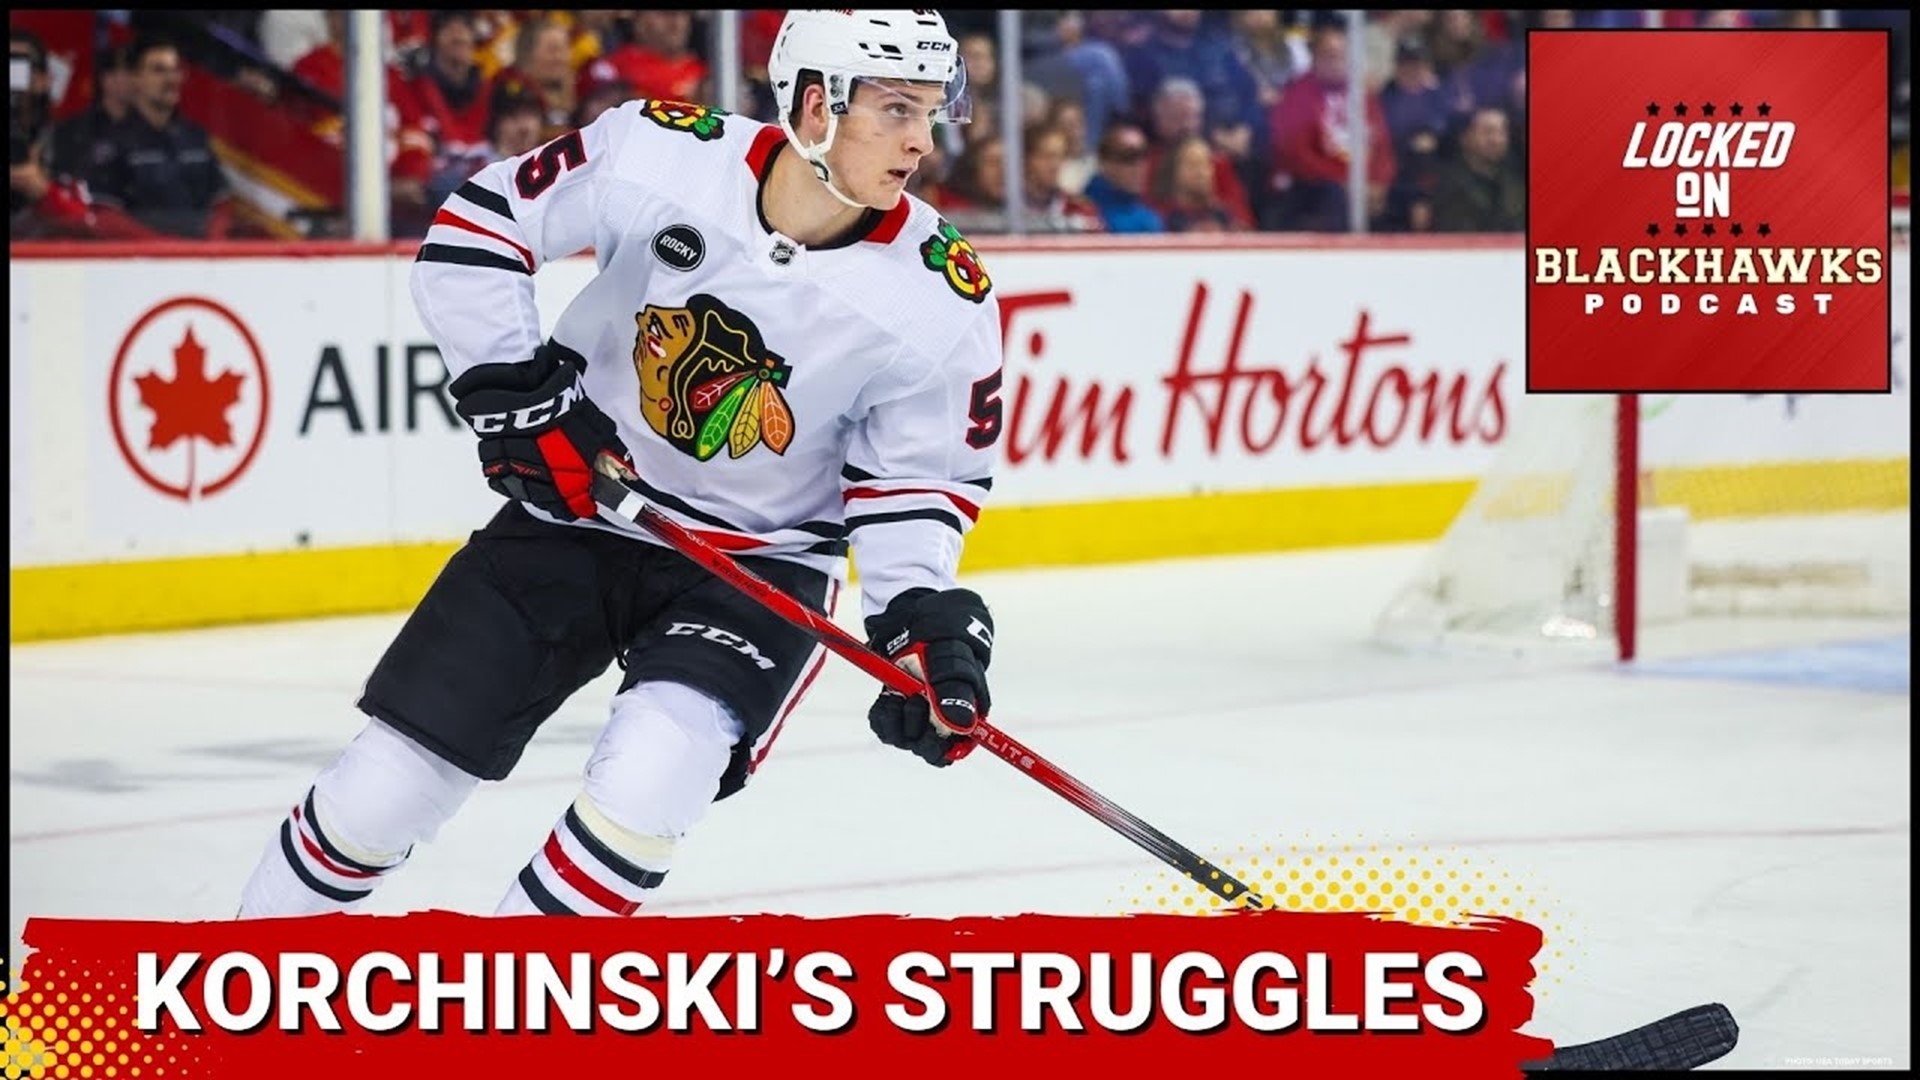 Thursday's episode begins with a recap of the Chicago Blackhawks' 6-2 defeat to the Los Angeles Kings, as they were unable to win back-to-back games.